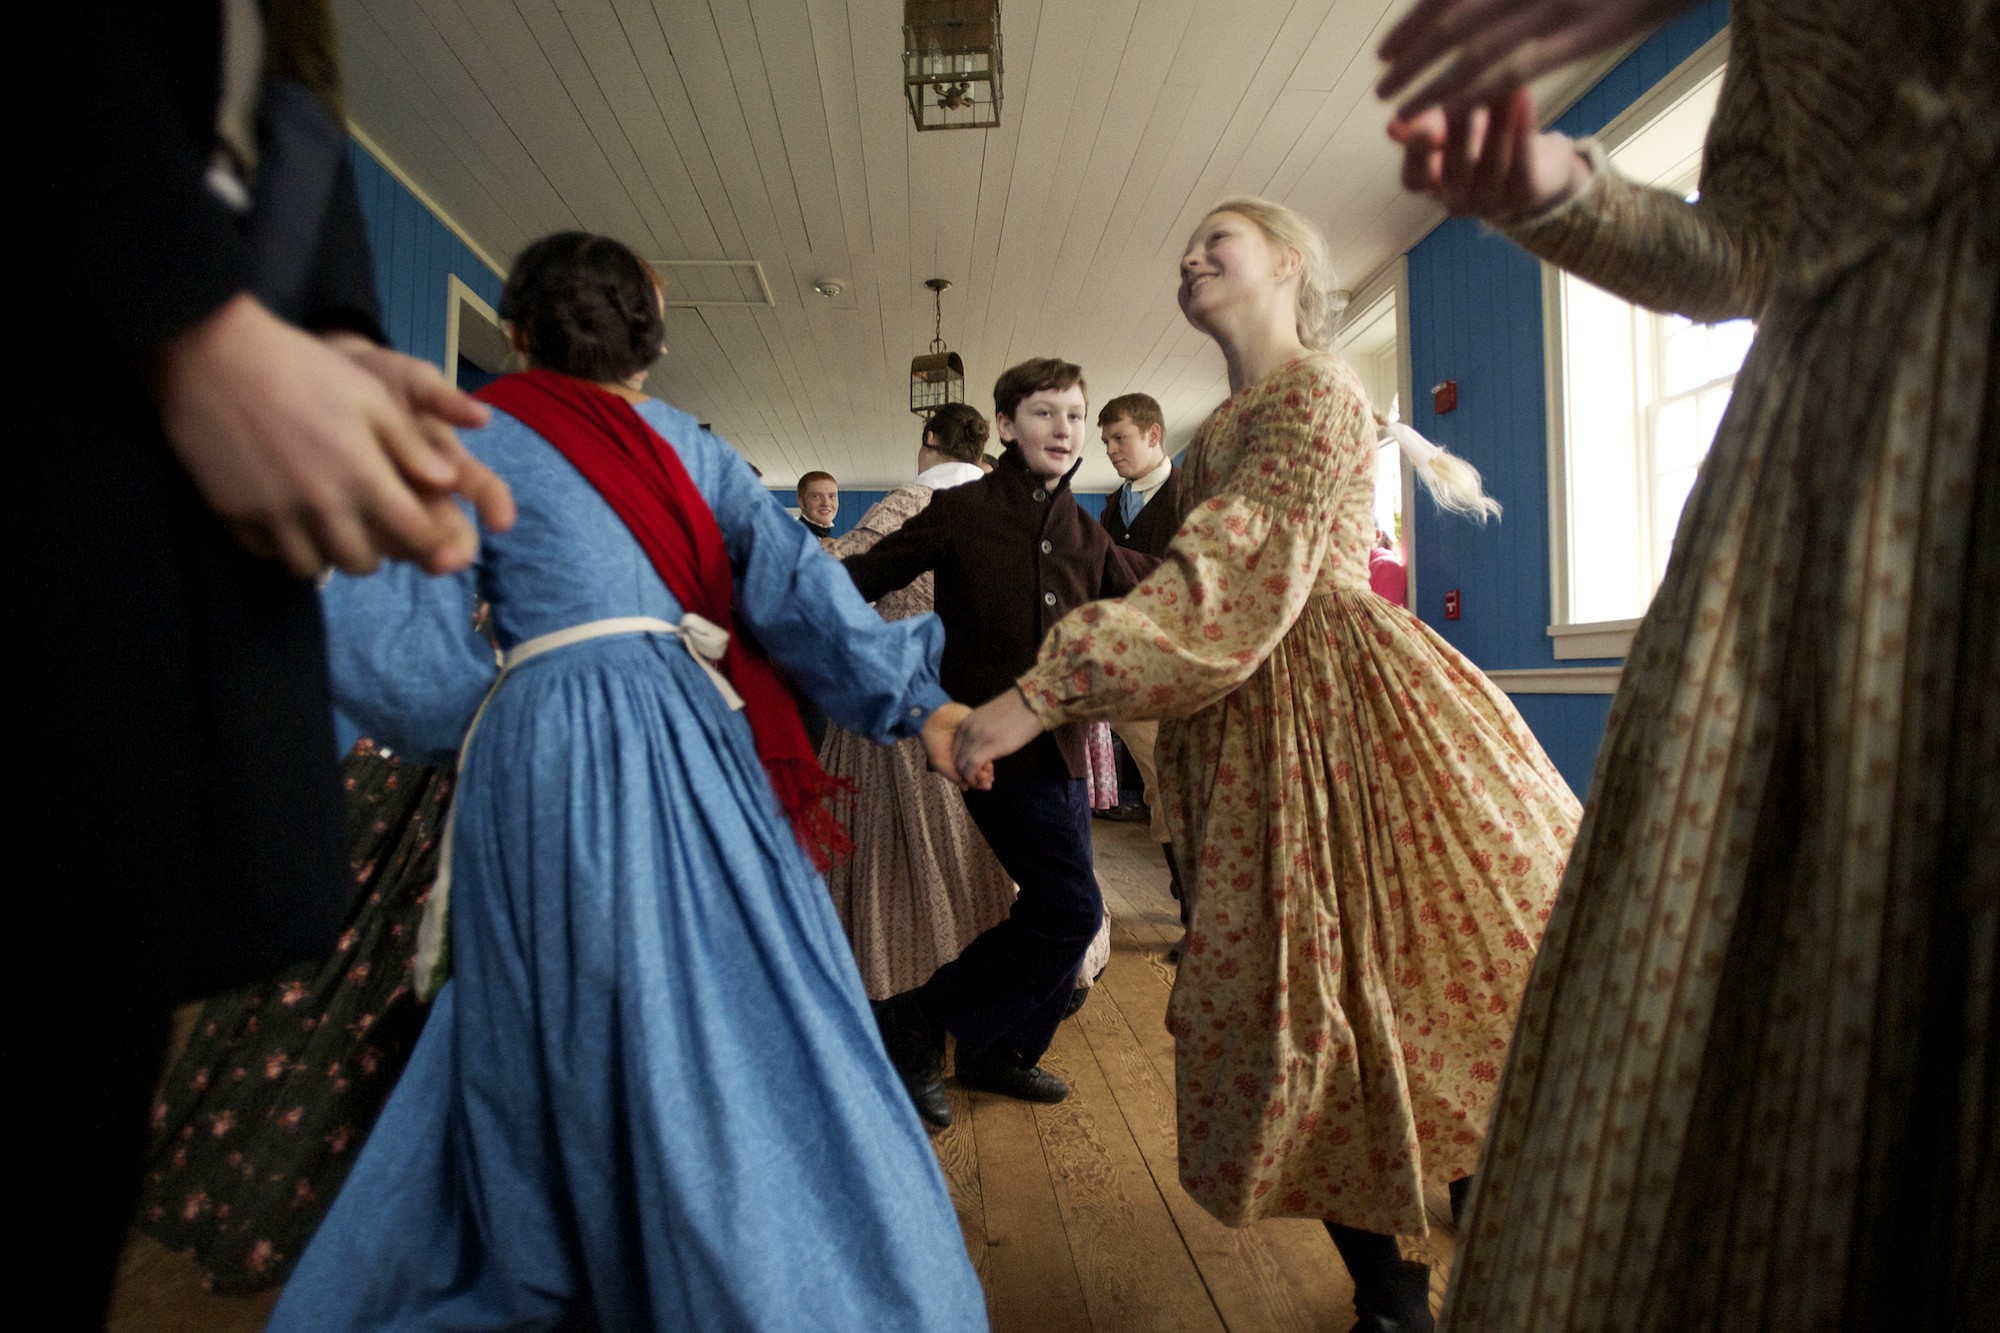 Children dance in the Counting House at Fort Vancouver during the annual Christmas at the Fort event in 2013.